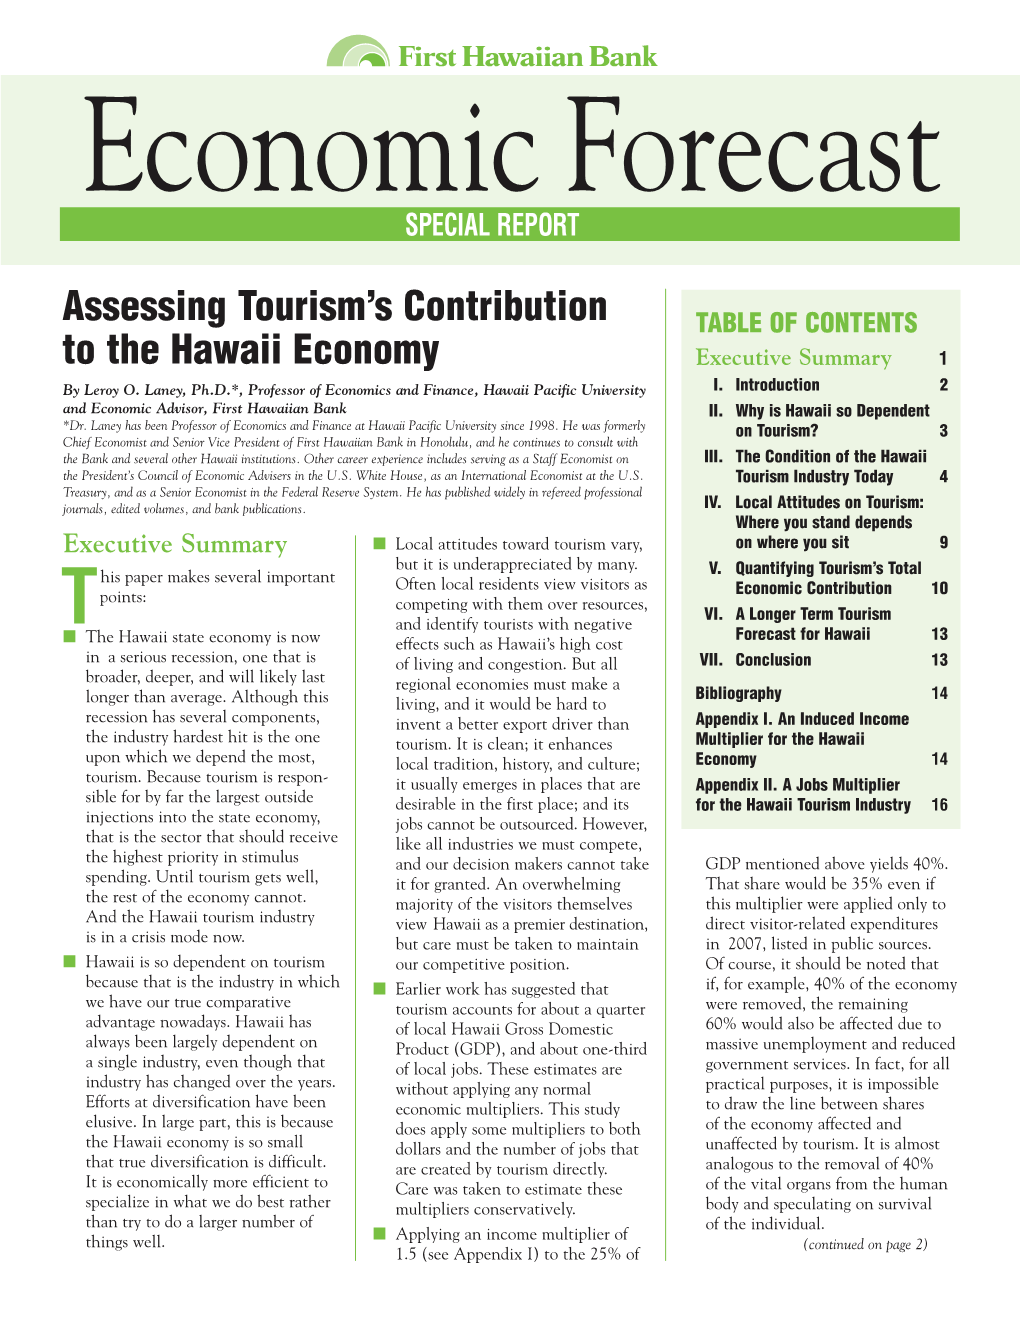 Assessing Tourism's Contribution to the Hawaii Economy